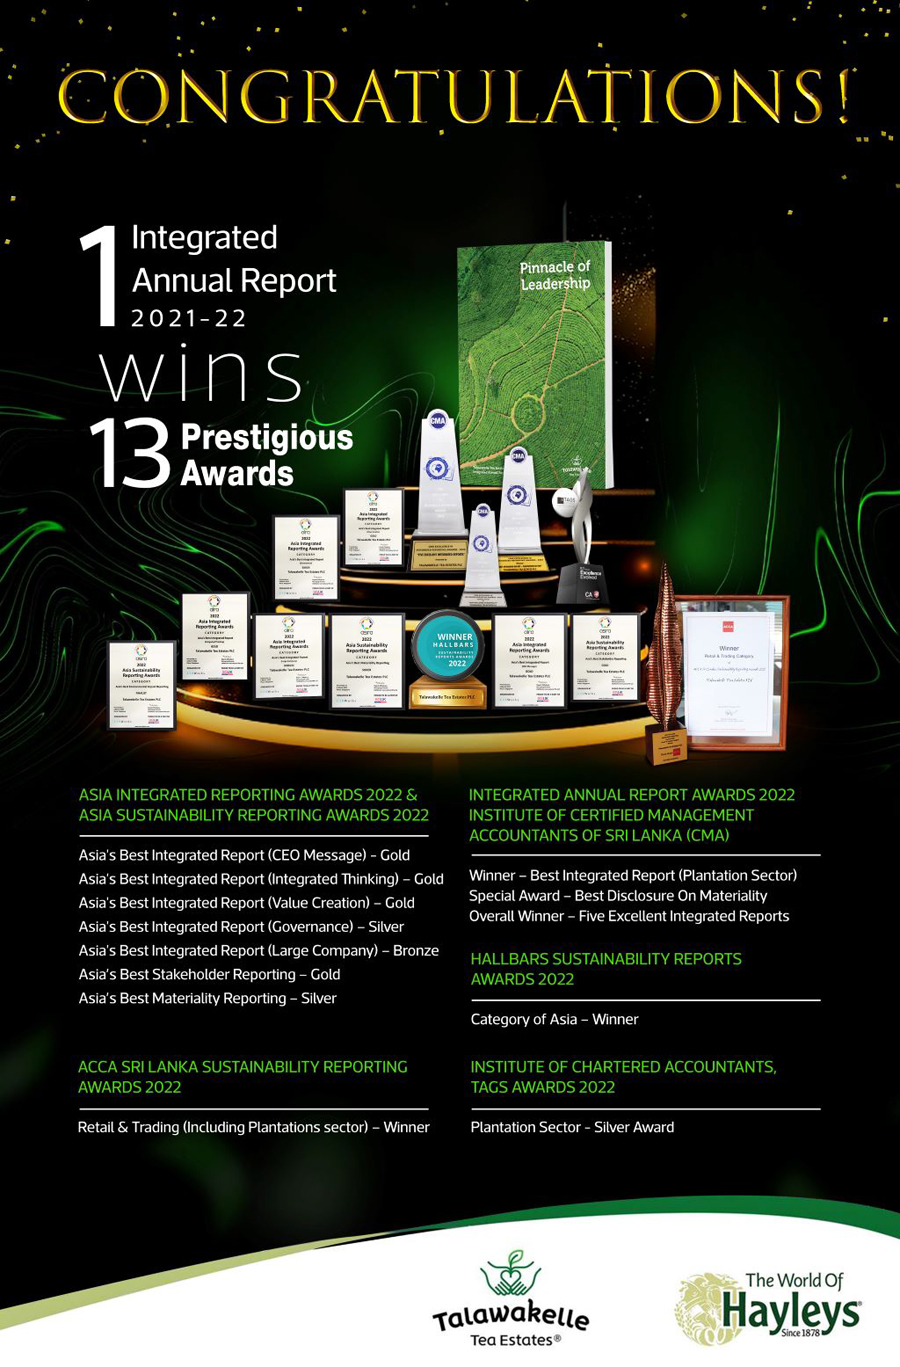 Talawakelle Tea Estates PLC Wins Gold at AIRA 2022 and ASRA 2022 for Good Governance and Sustainability Practices